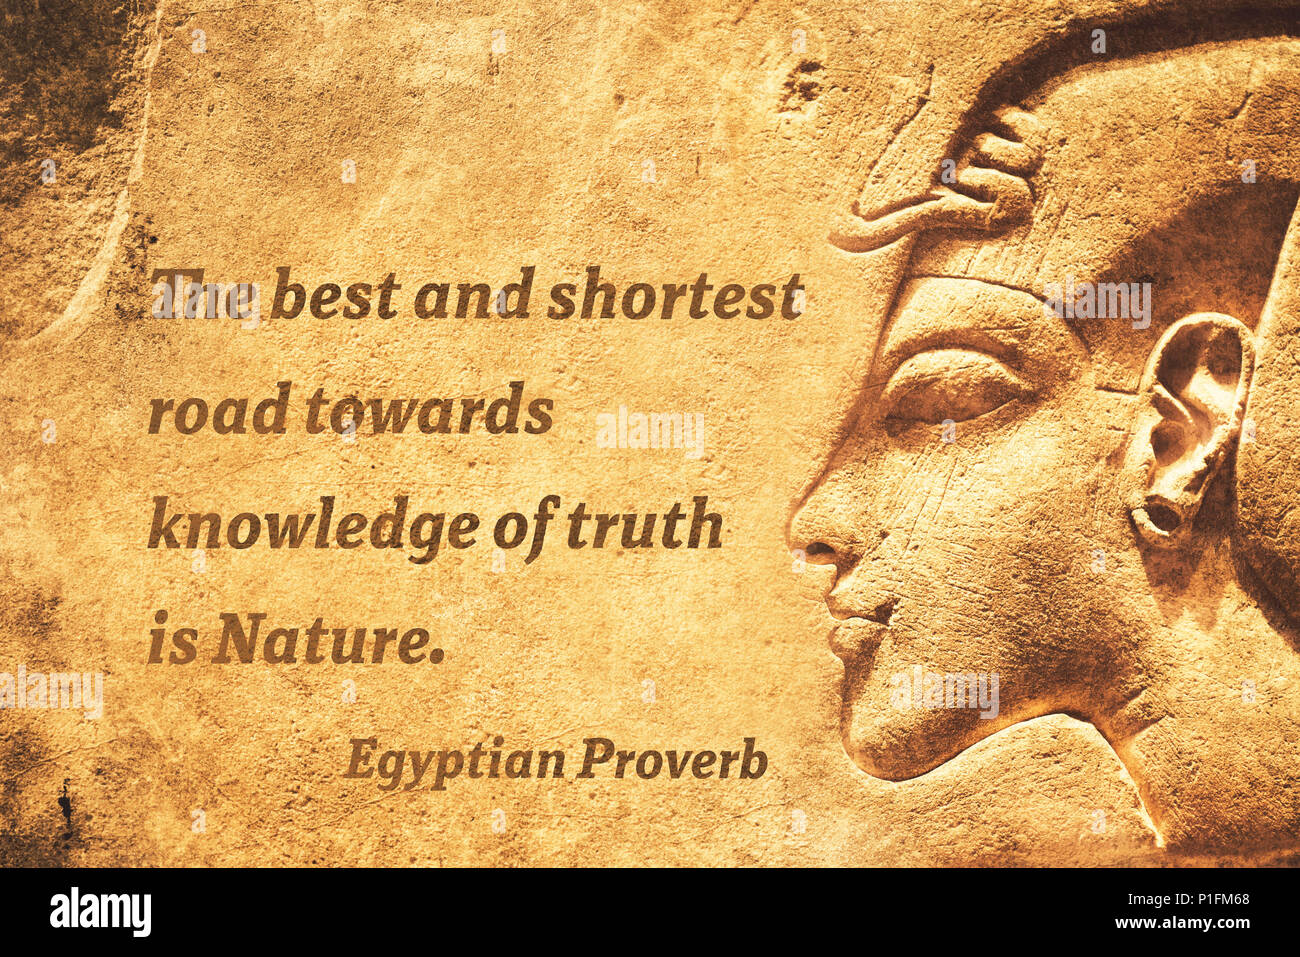 The best and shortest road towards knowledge of truth is Nature - ancient Egyptian Proverb citation Stock Photo